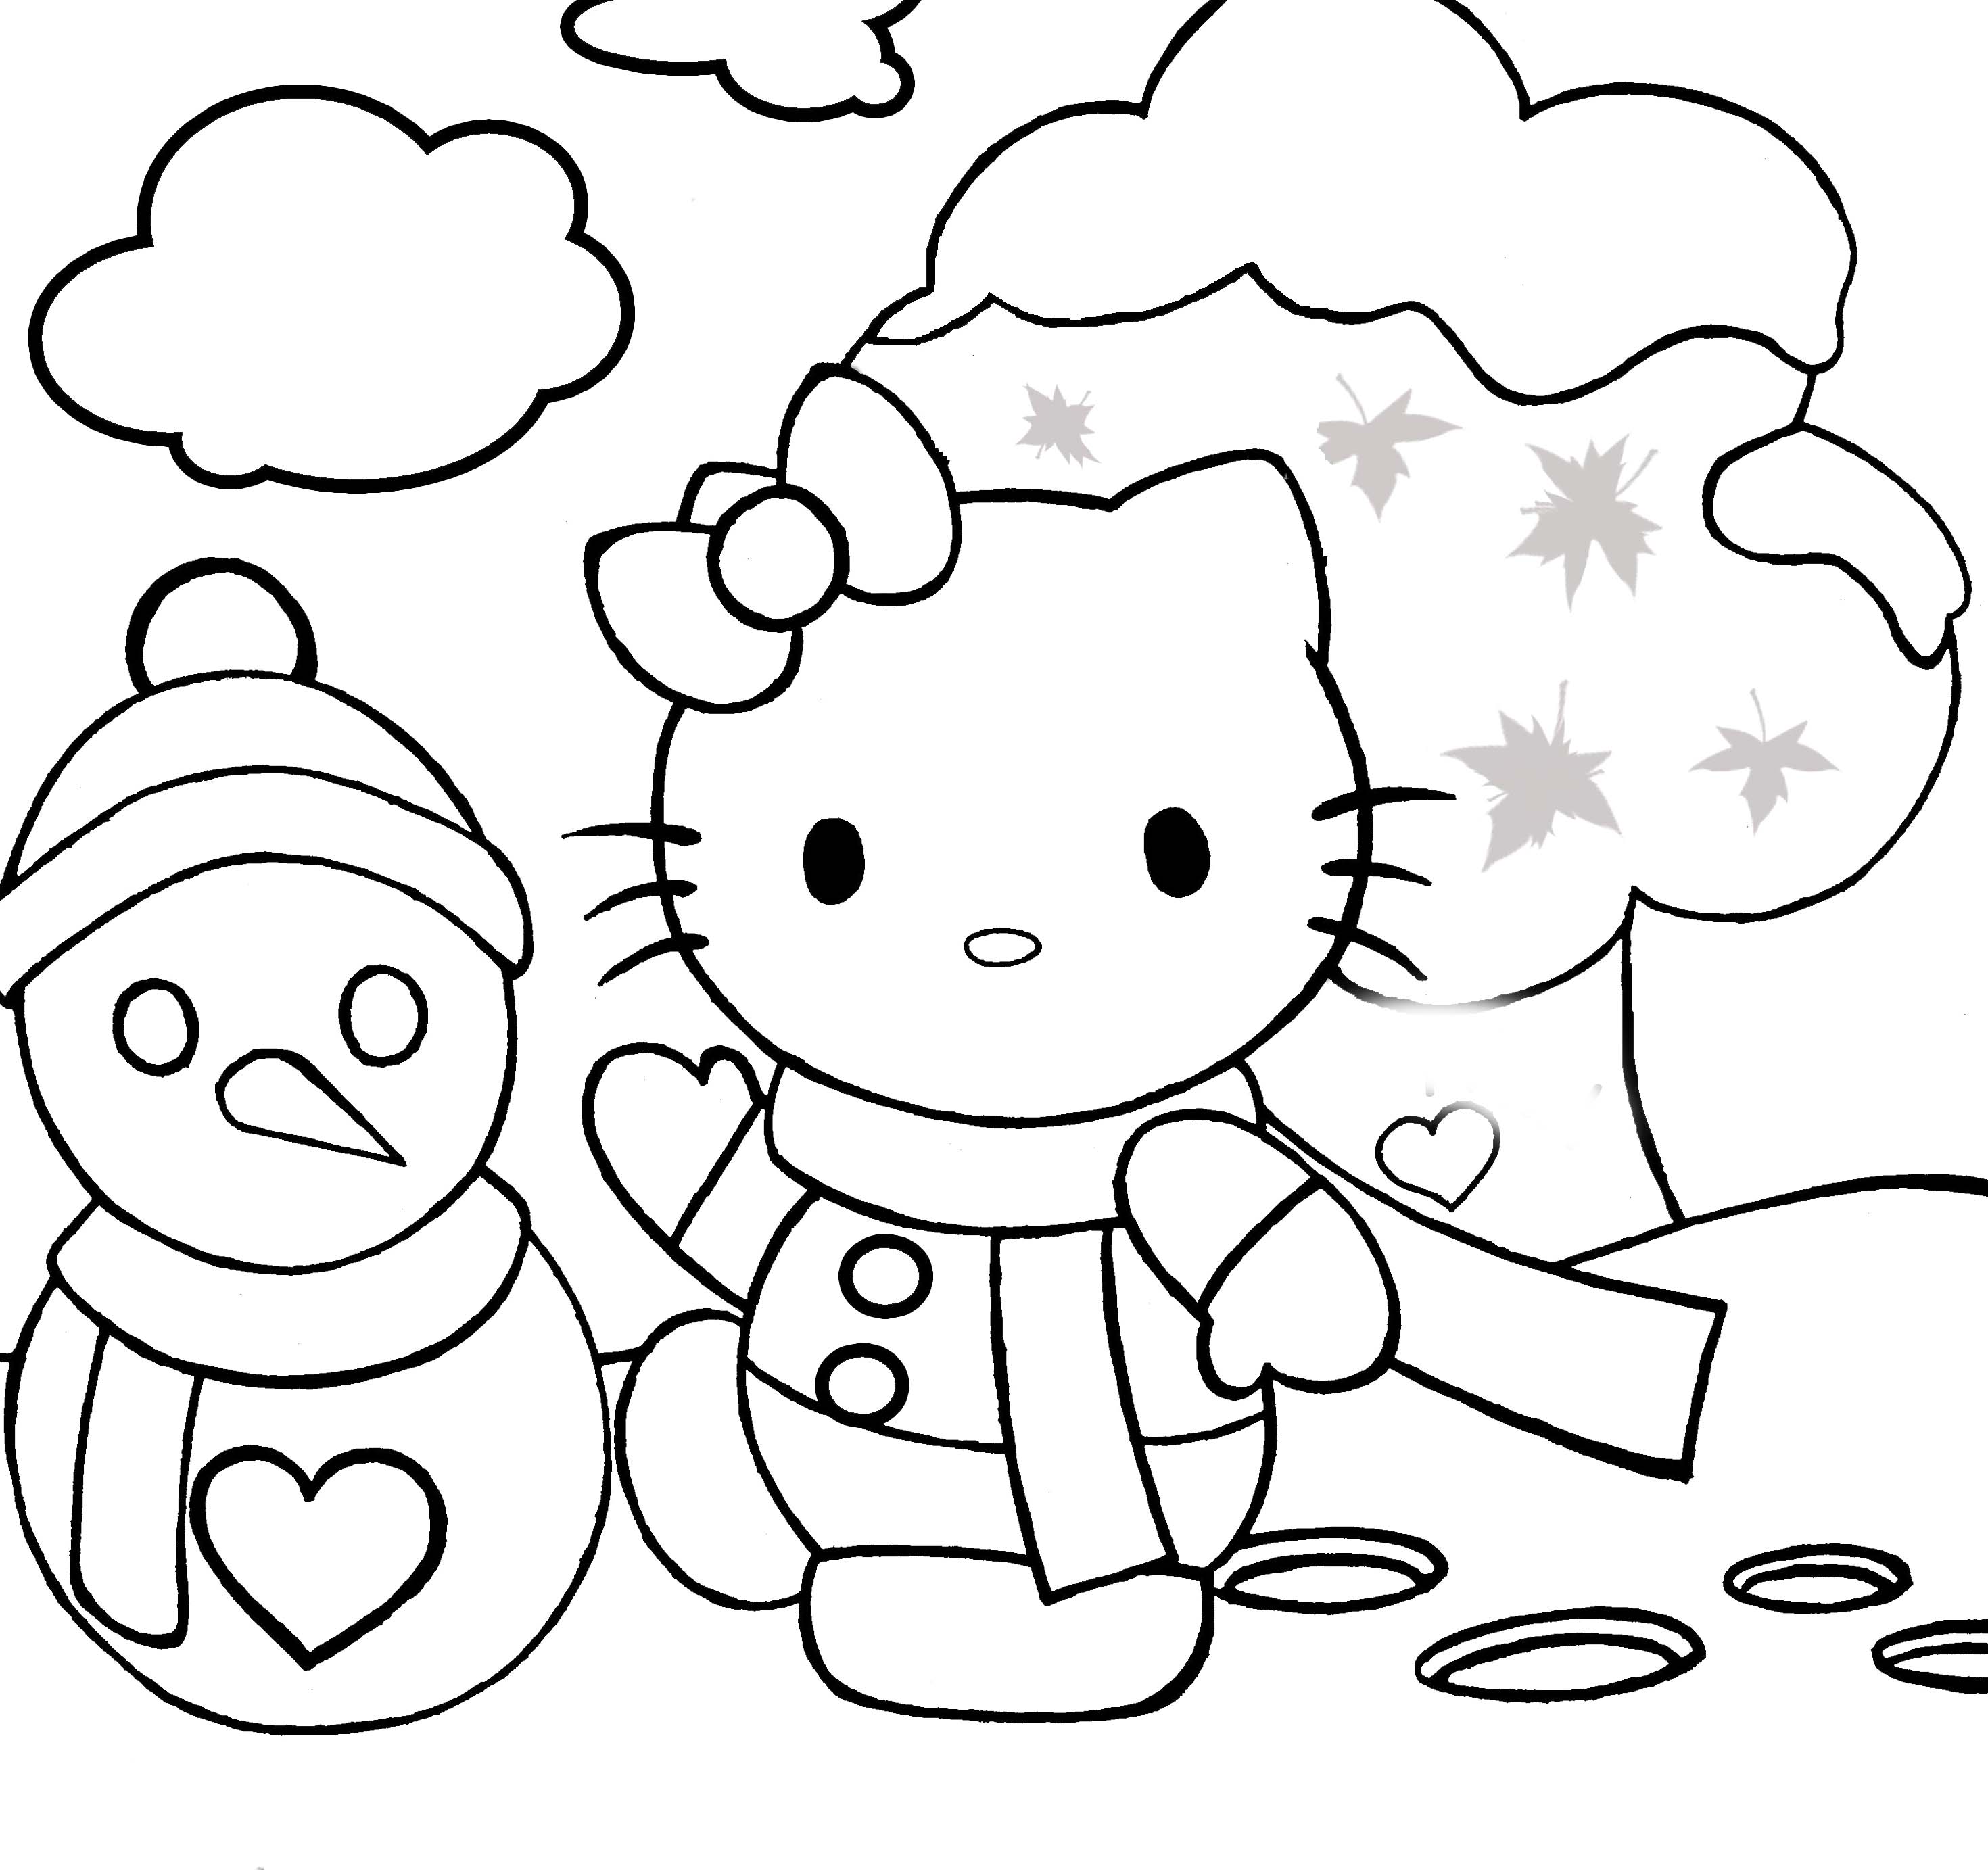 Snow Day Coloring Page at GetColorings.com | Free printable colorings